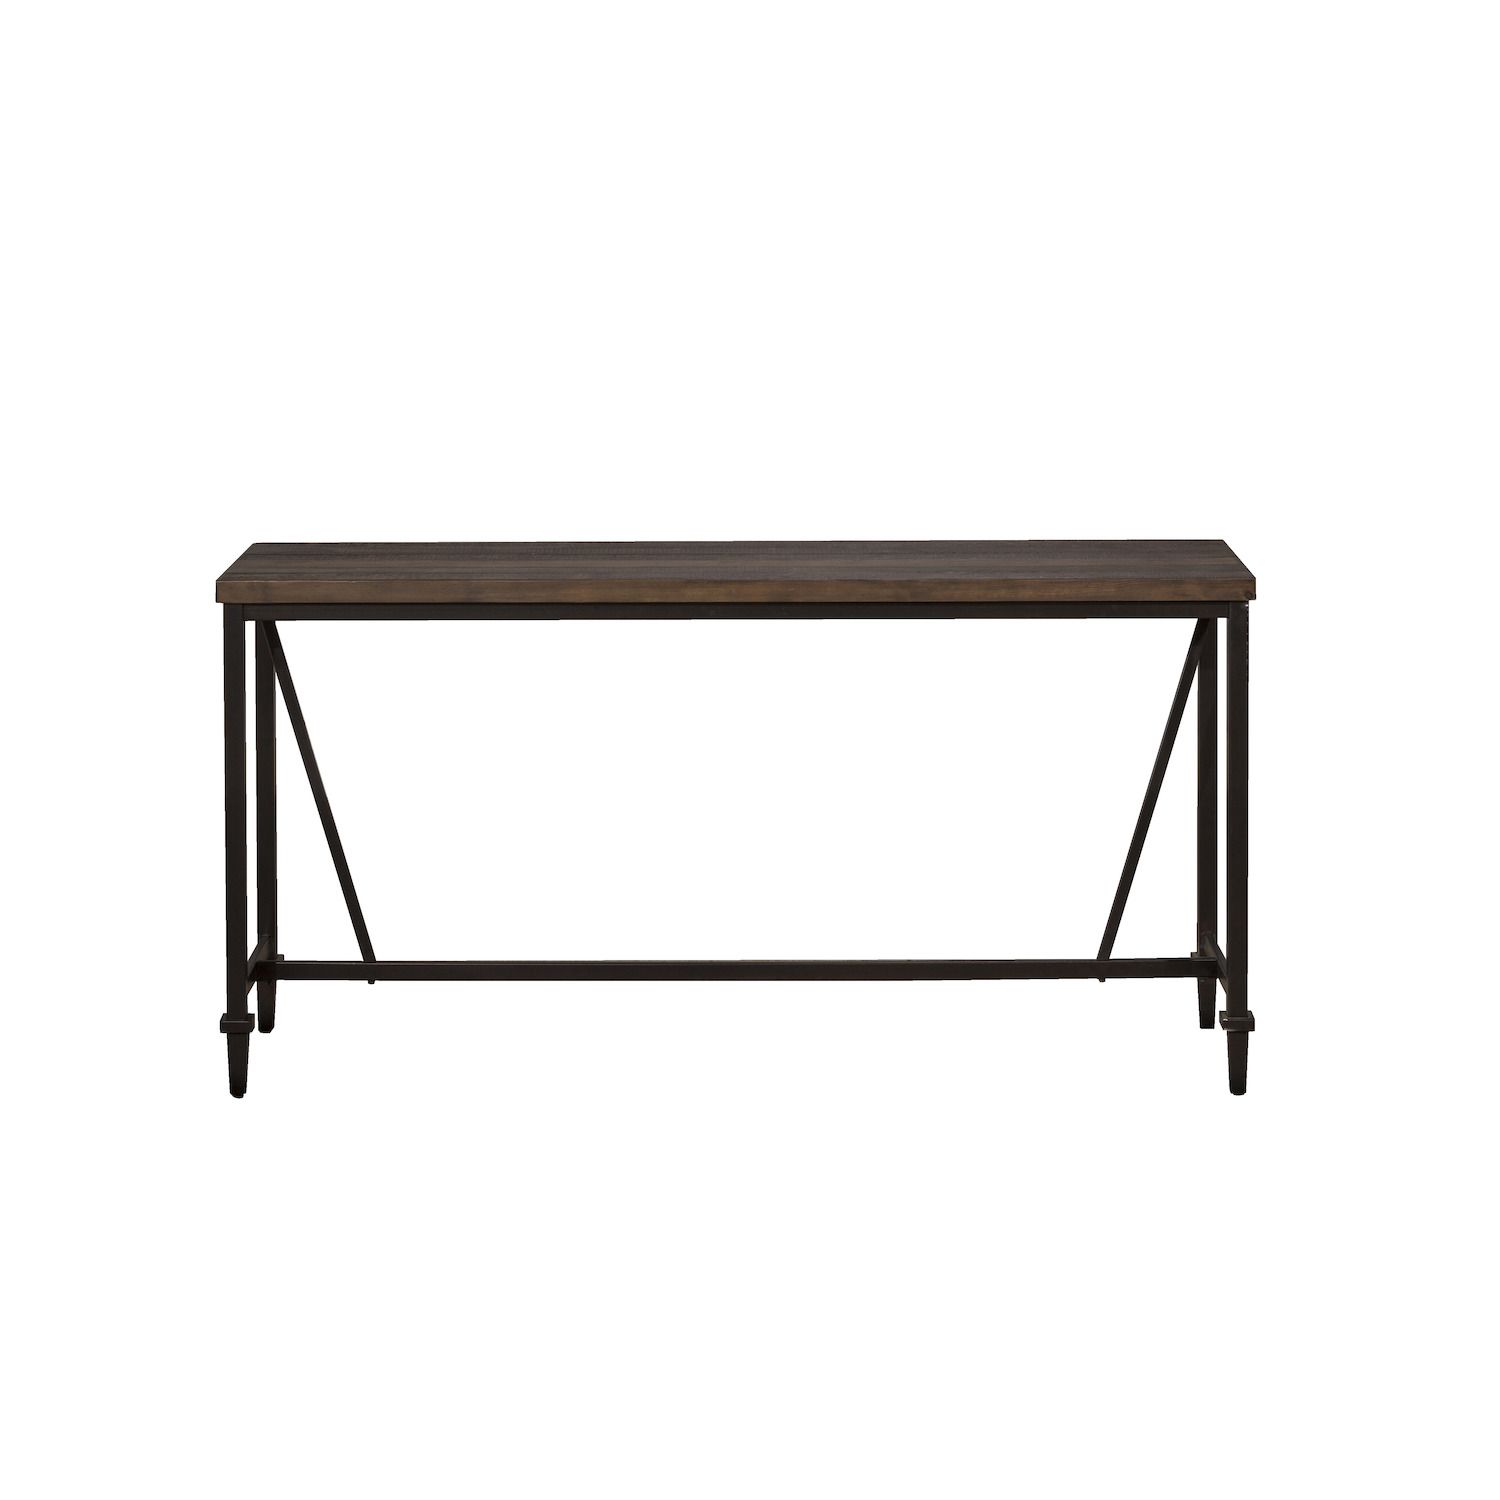 Image for Hillsdale Furniture Trevino Sofa Table at Kohl's.